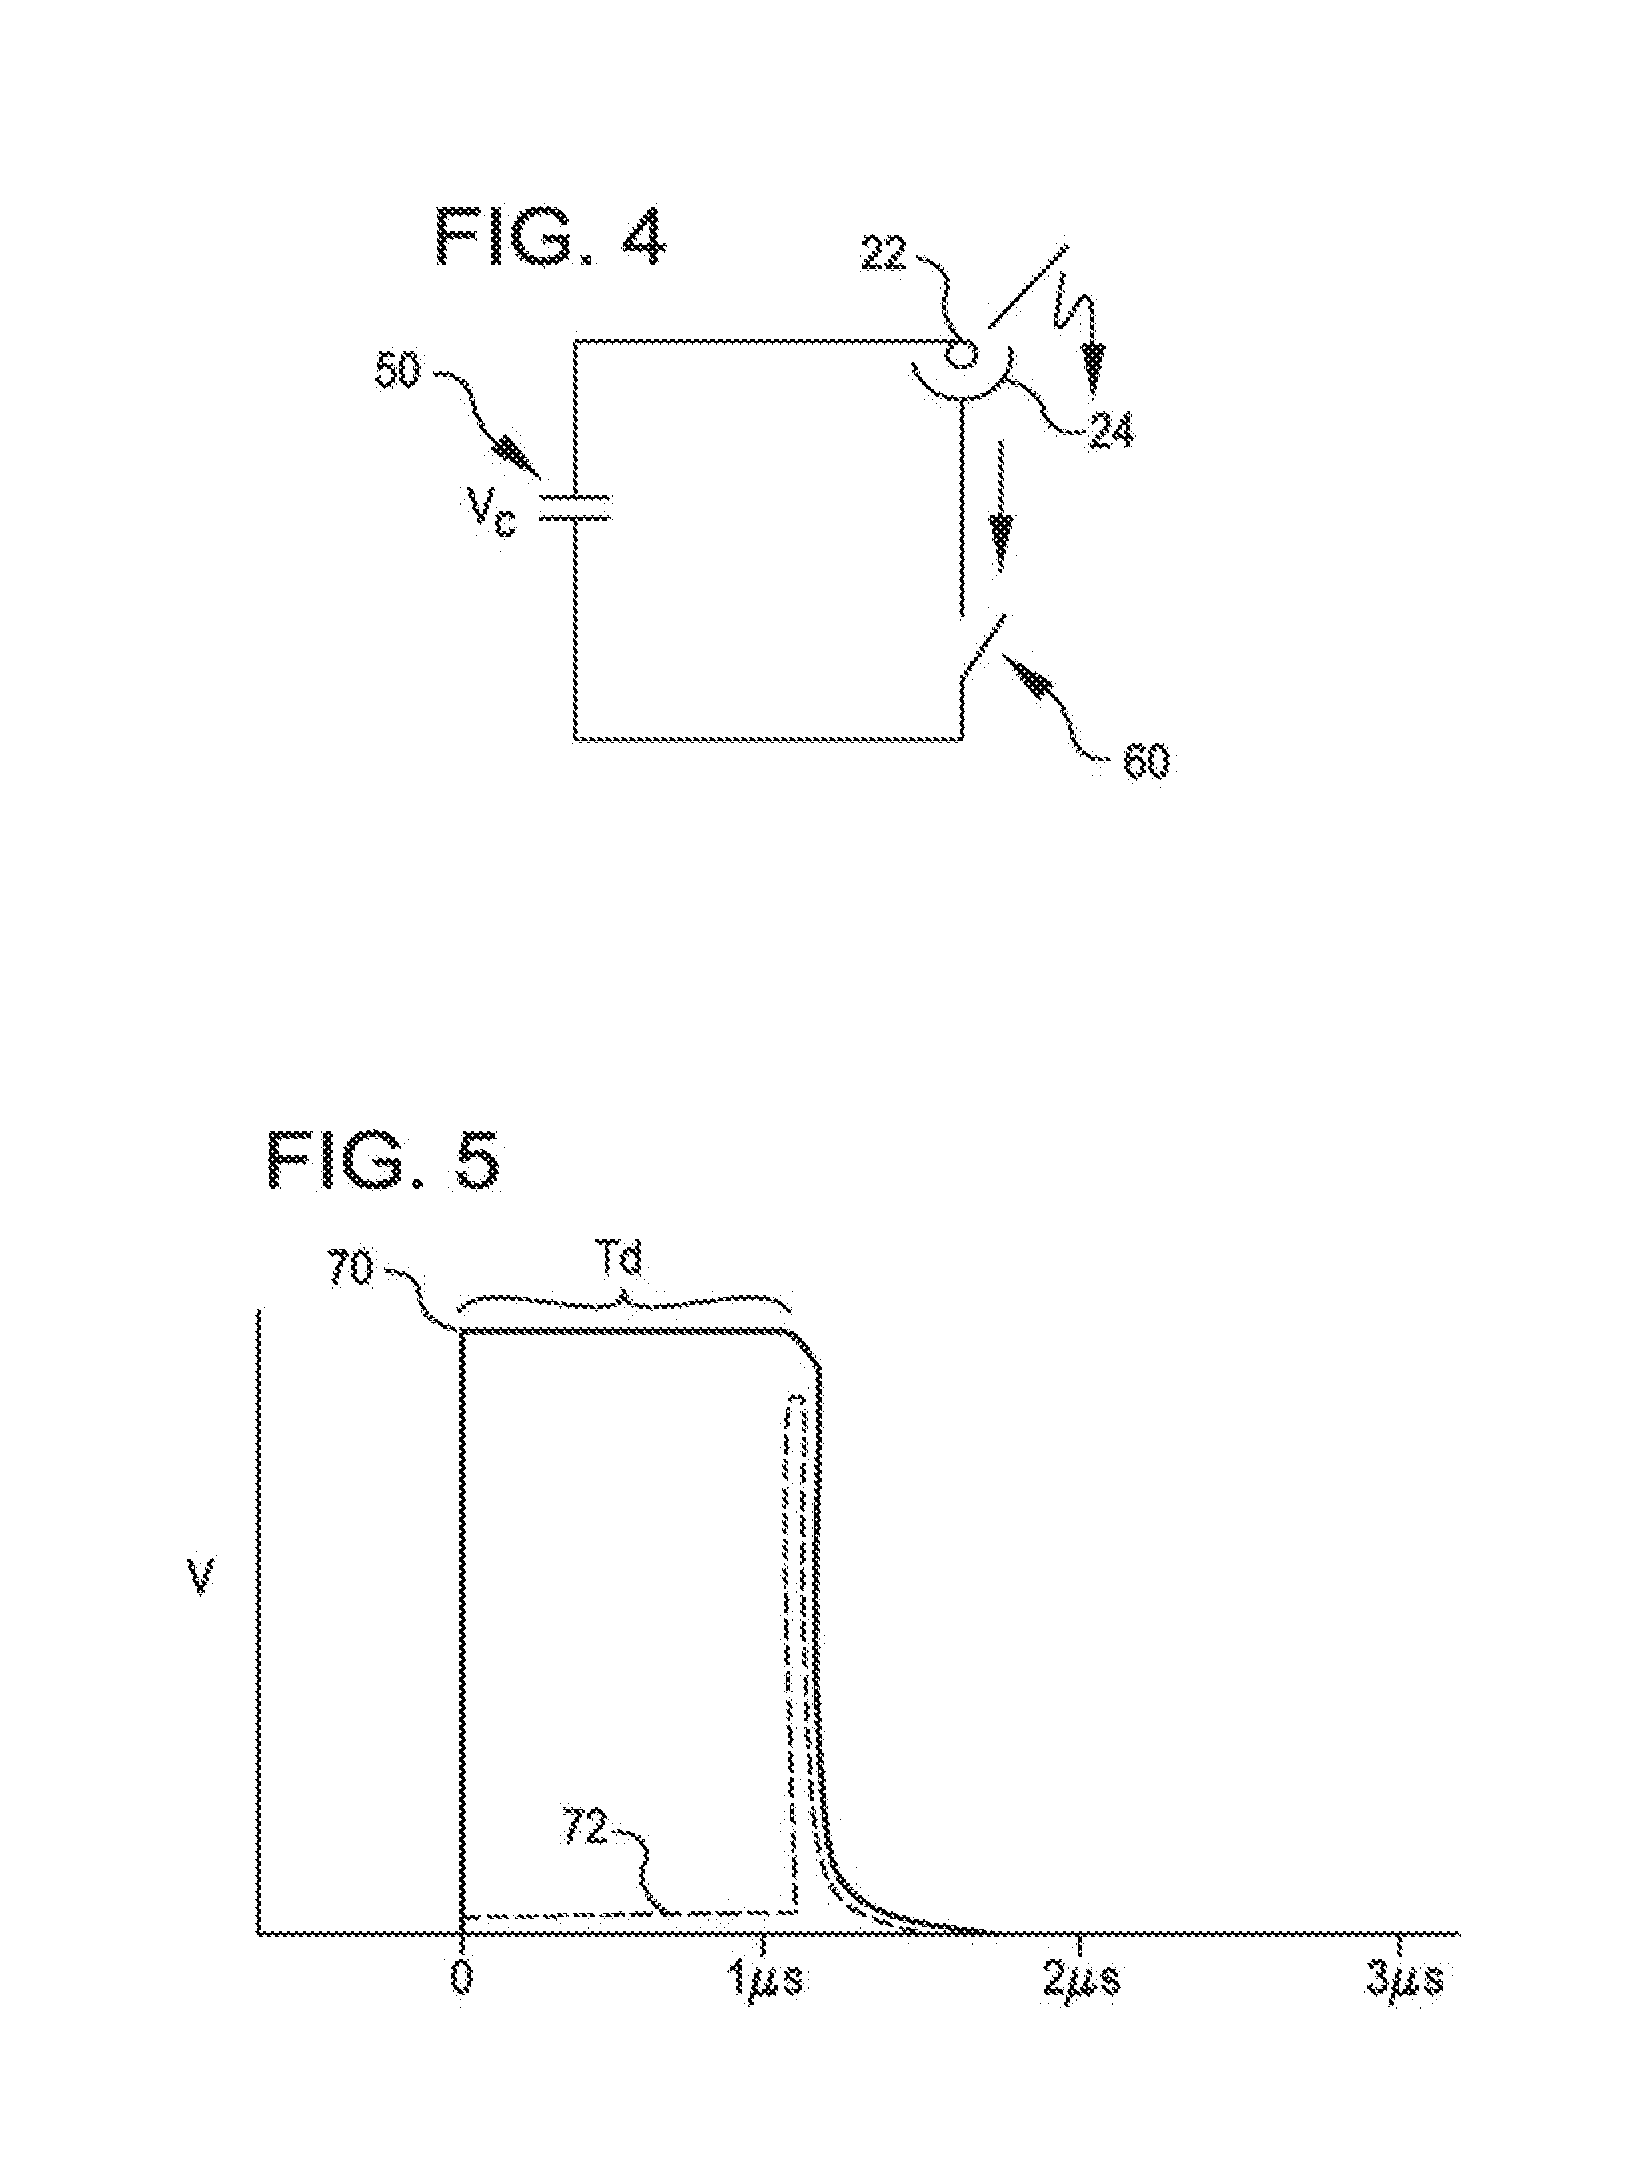 Shock wave catheter system with energy control